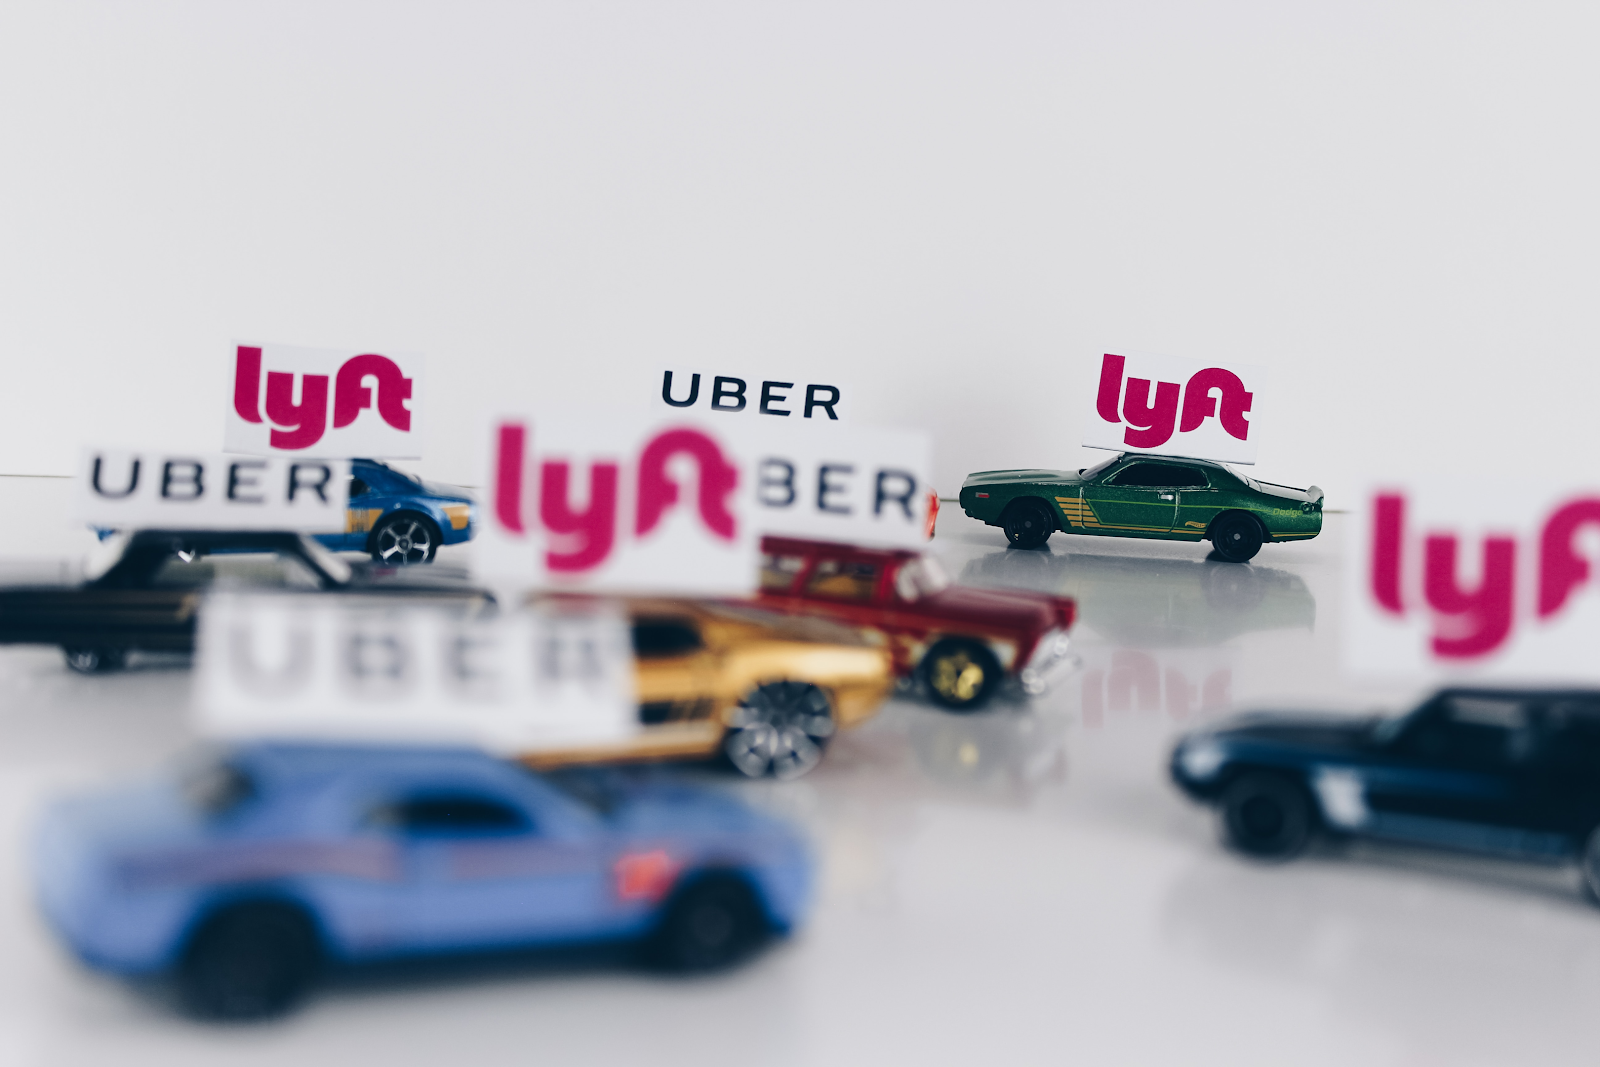 tiny matchbox cars with uber and lyft logos on them